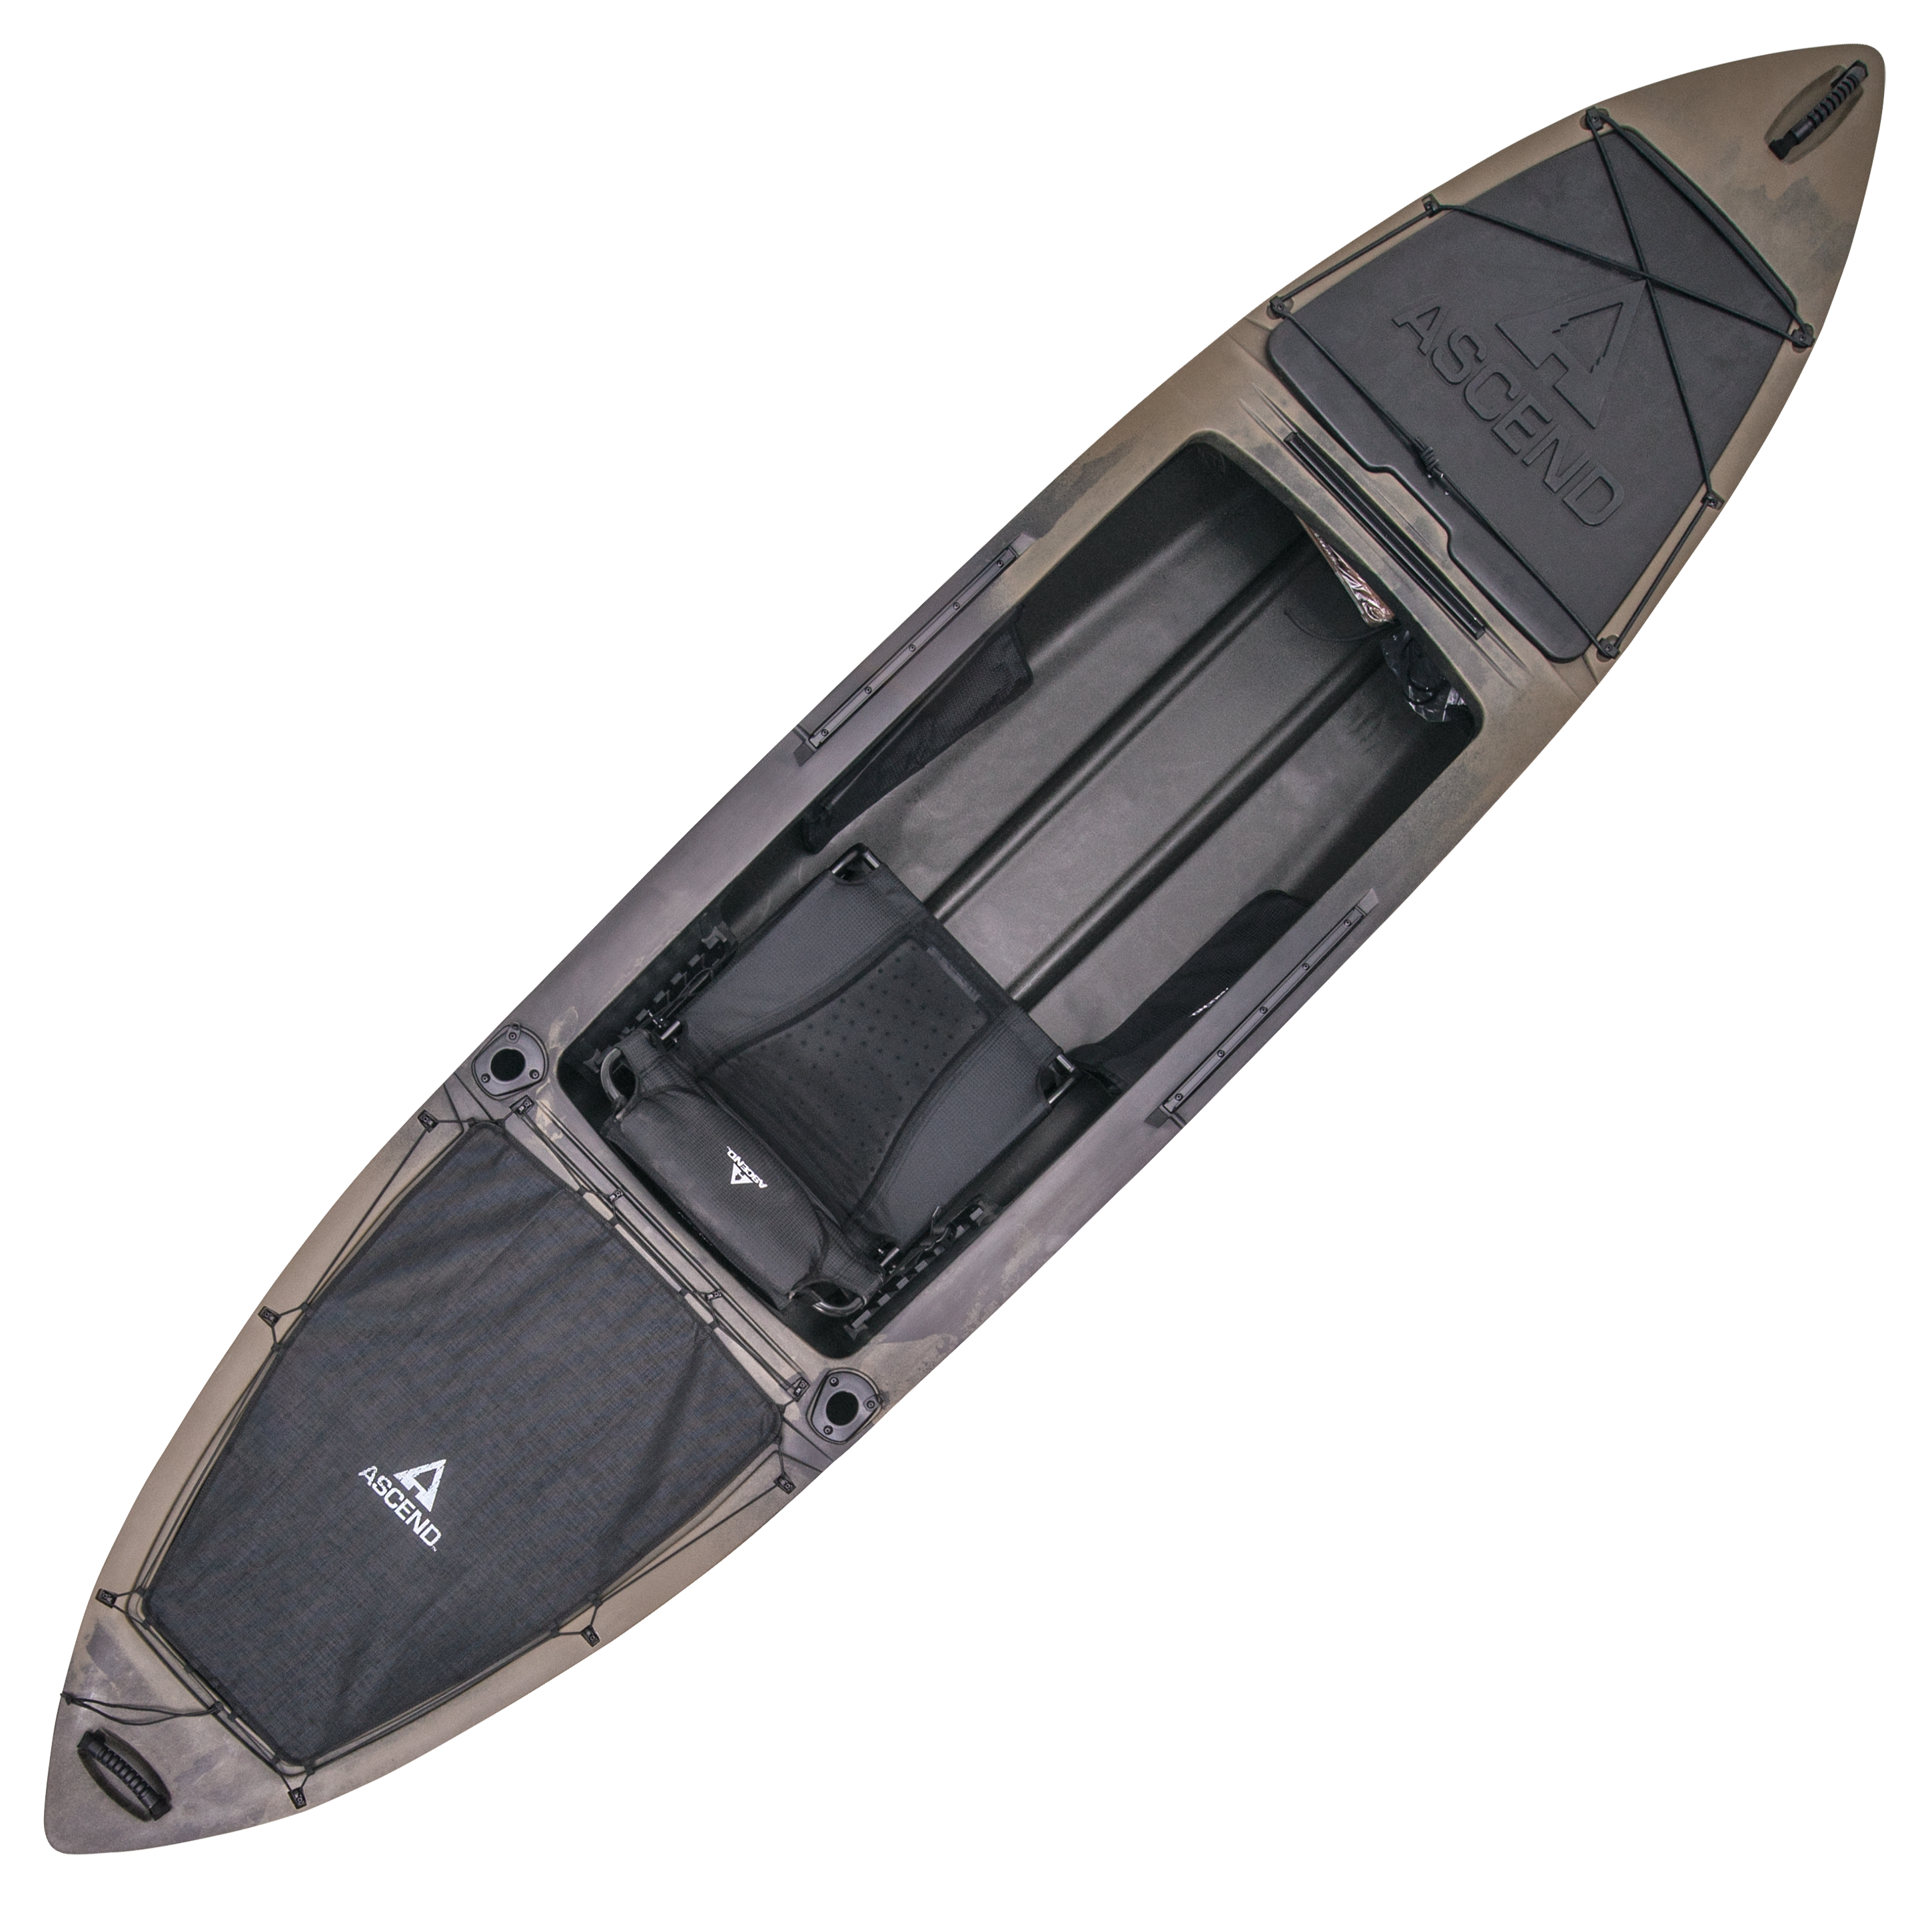 Fishing kayak setup (Ascend fs10) like and subscribe for more